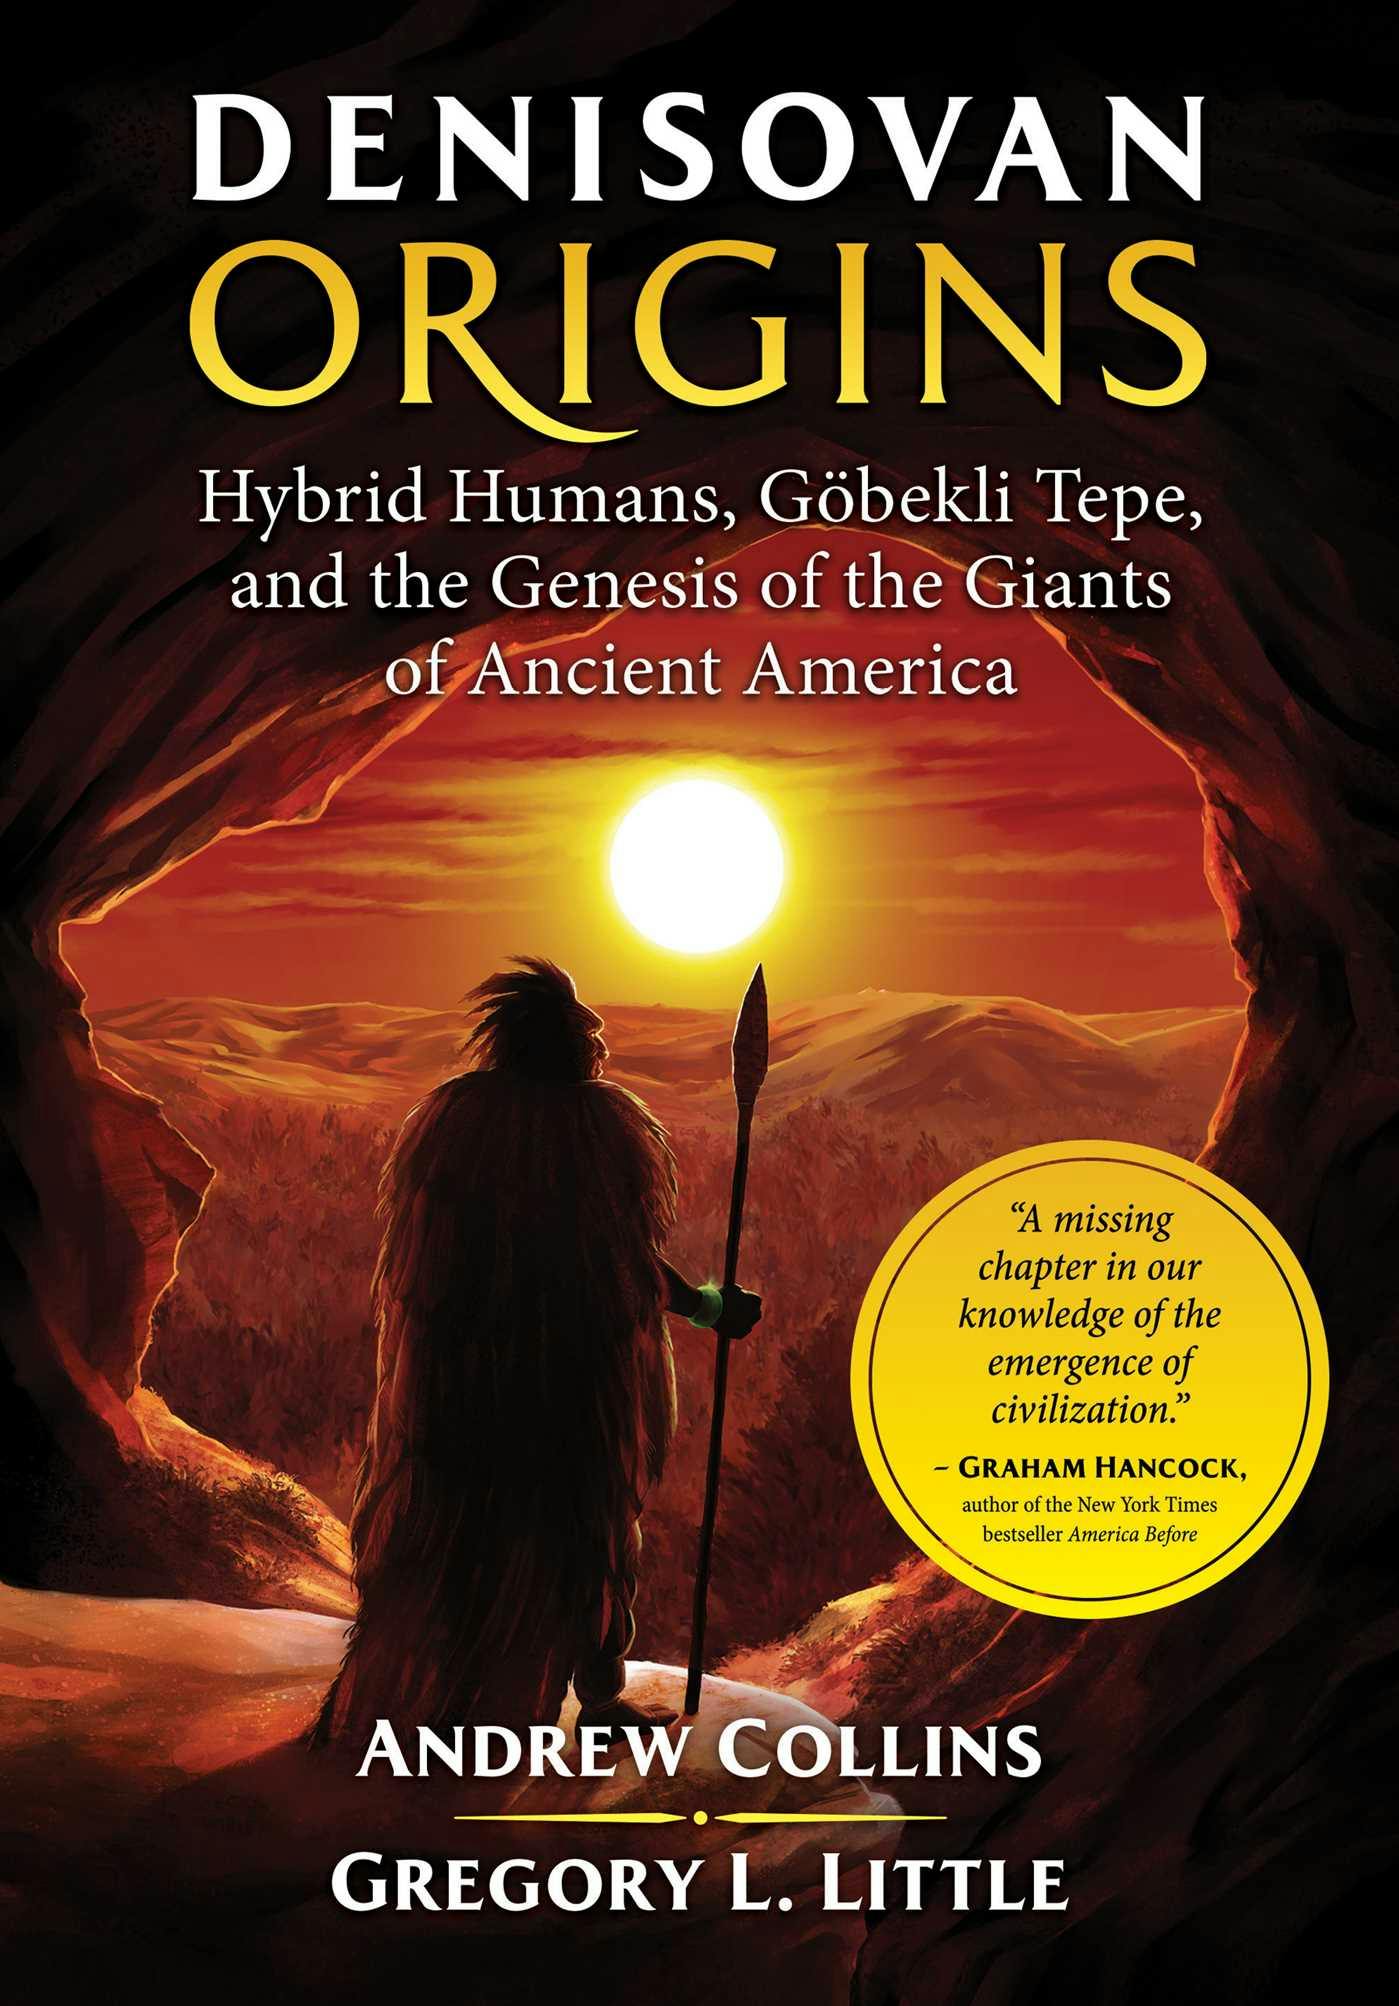 Denisovan Origins: Hybrid Humans, Göbekli Tepe, and the Genesis of the Giants of Ancient America - Gregory L. Little, Andrew Collins